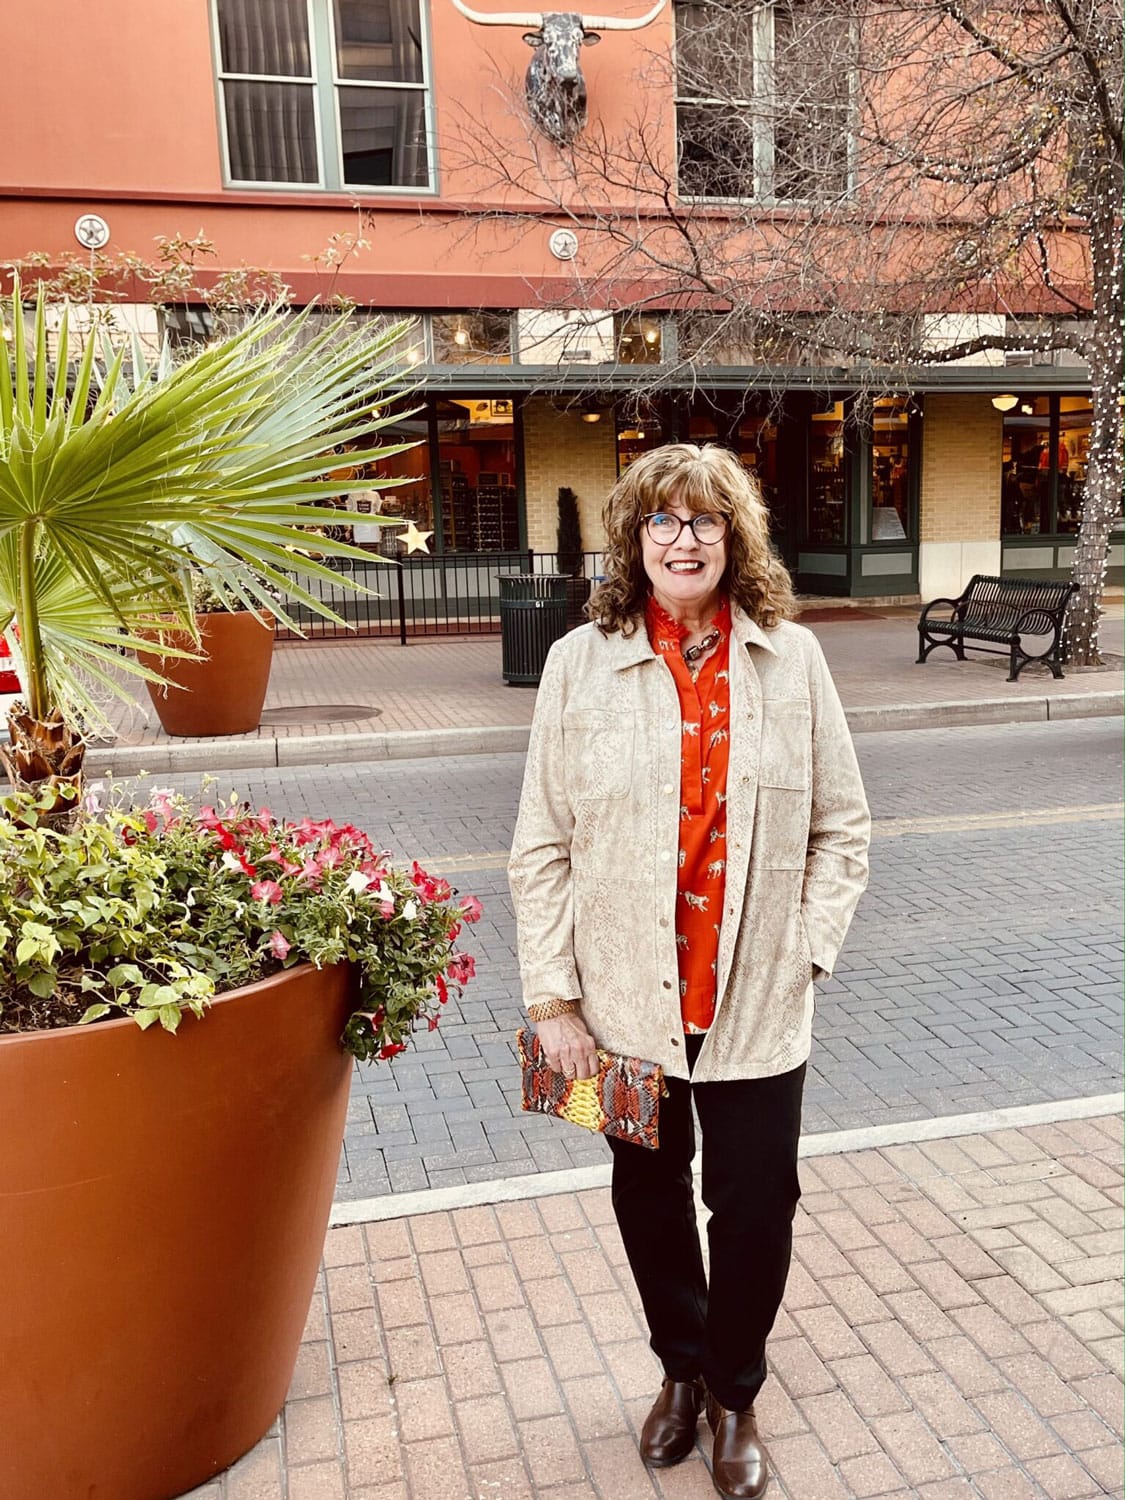 Pamela Lutrell a Stylish 68 year old blogger with a heart as big as Texas